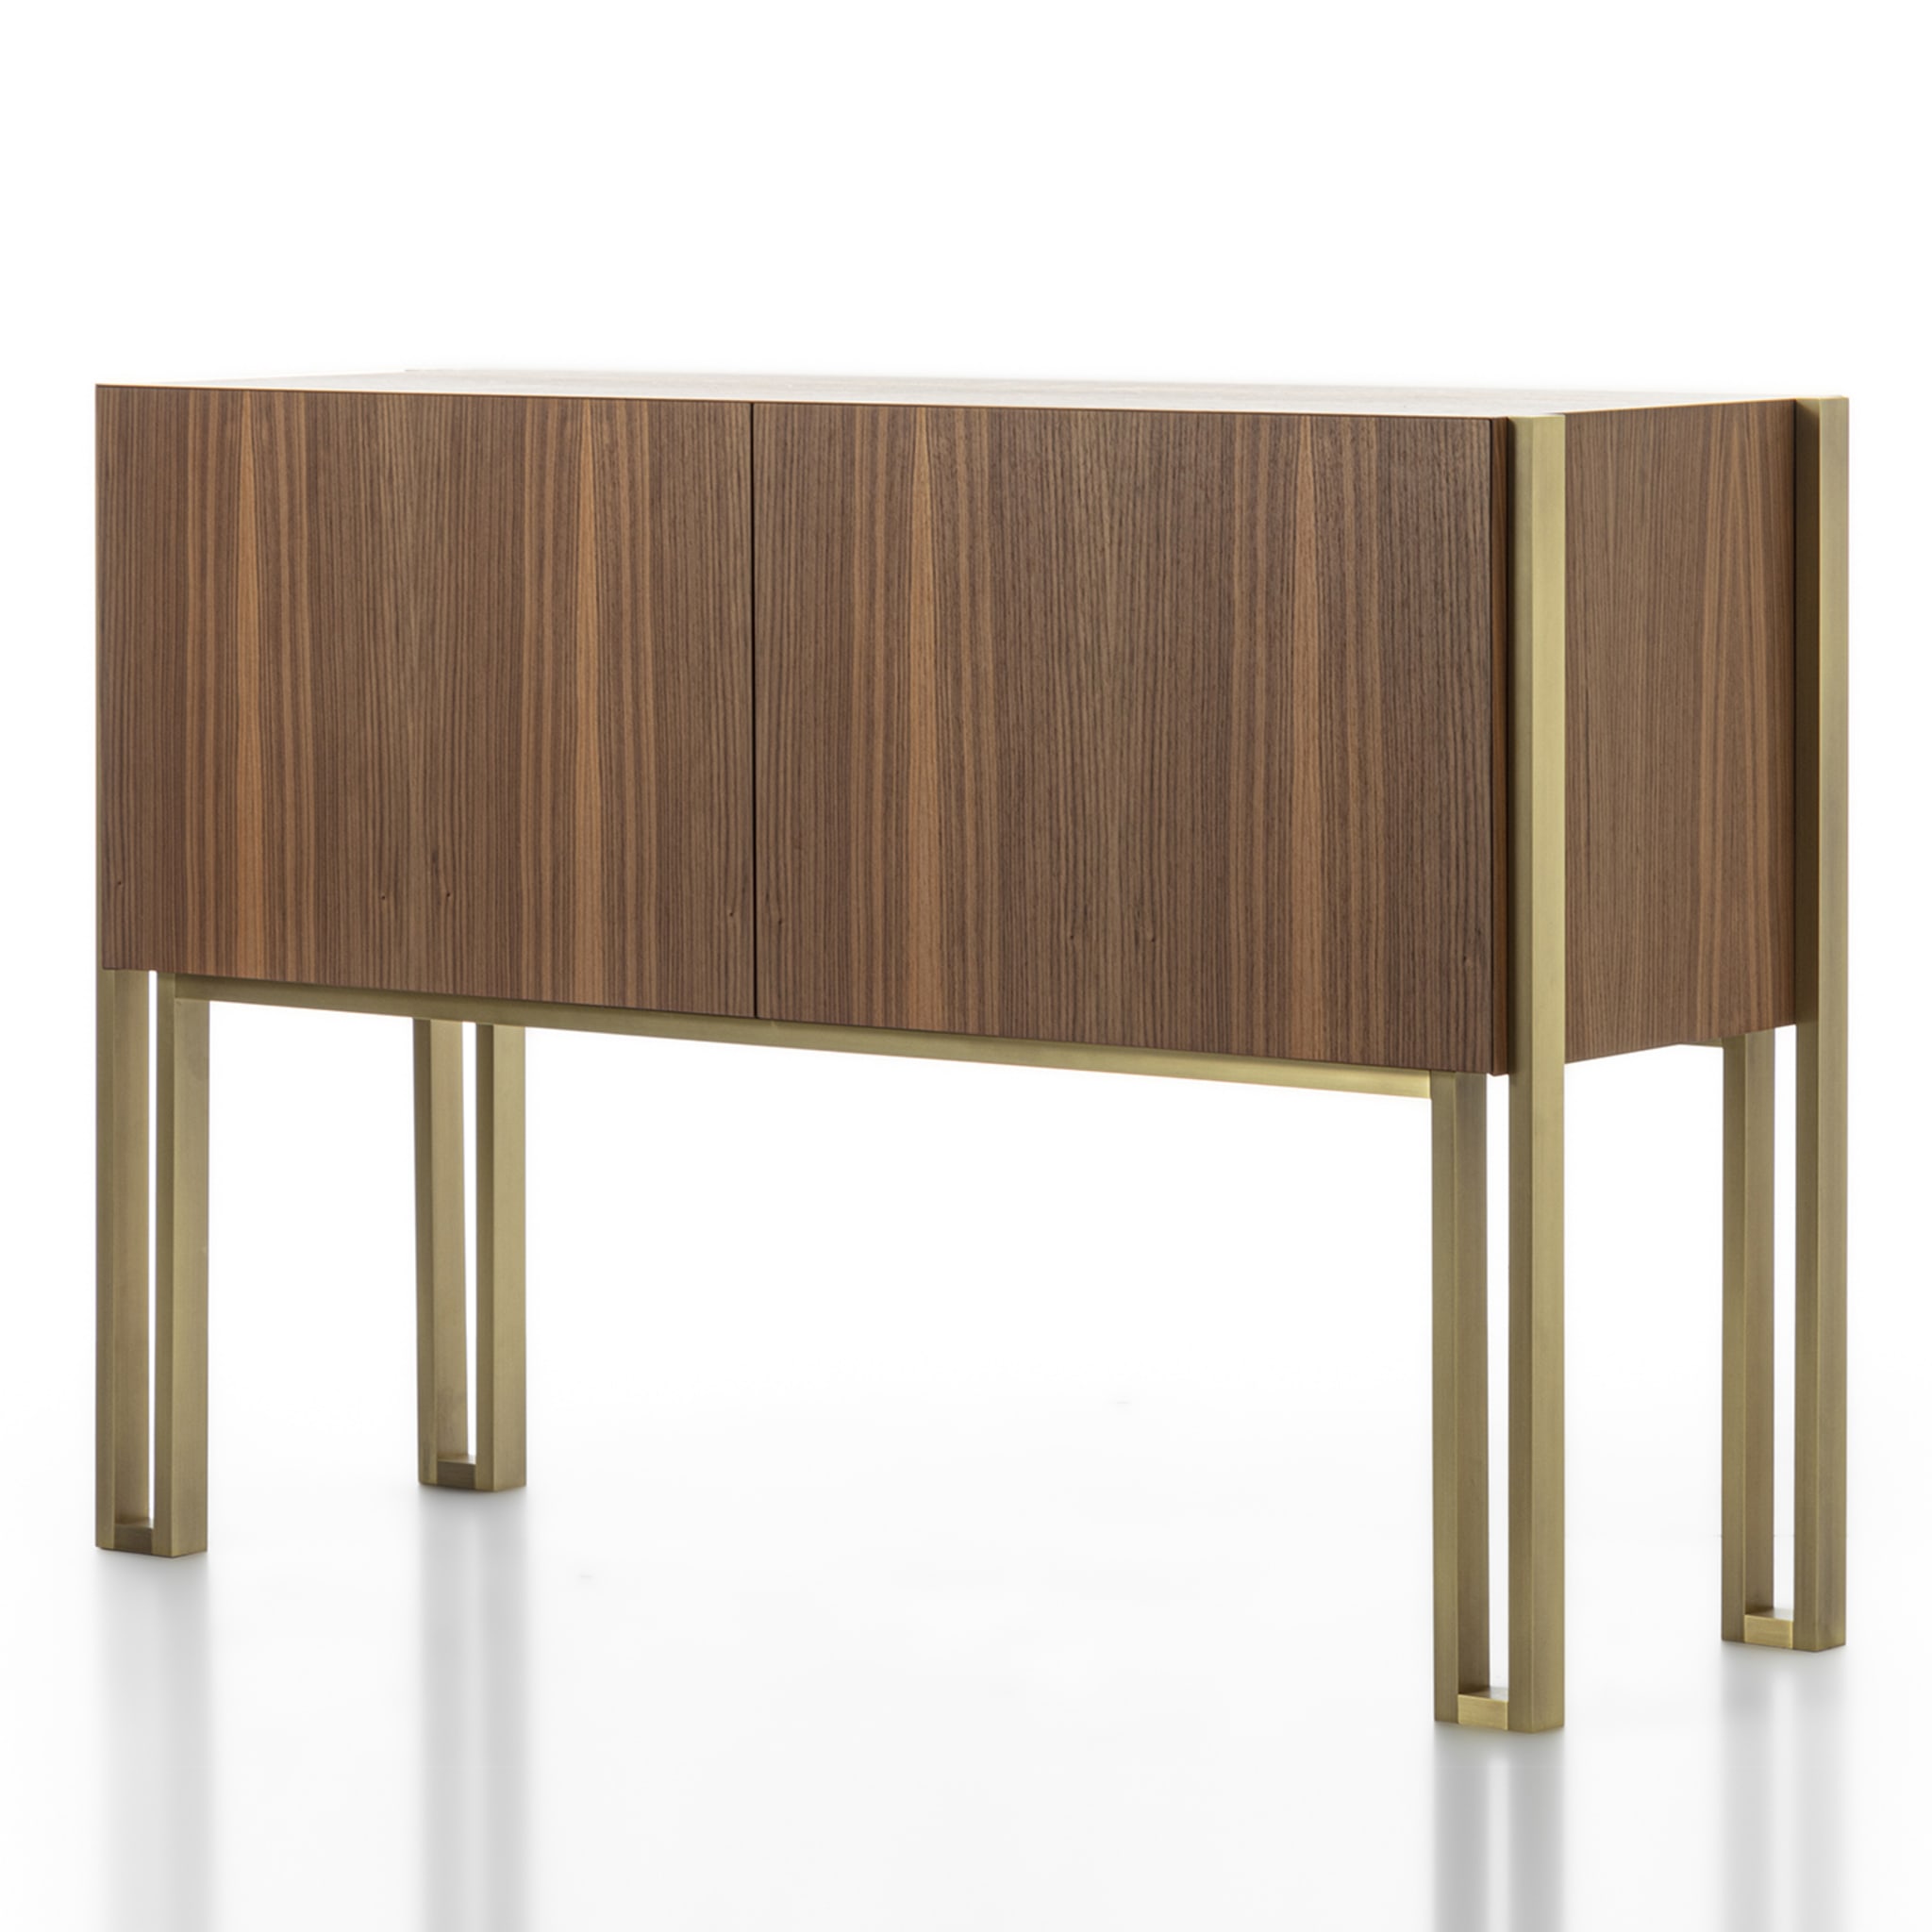 Mirage Vintage with Brass Legs in Canaletto Walnut Sideboard - Alternative view 3